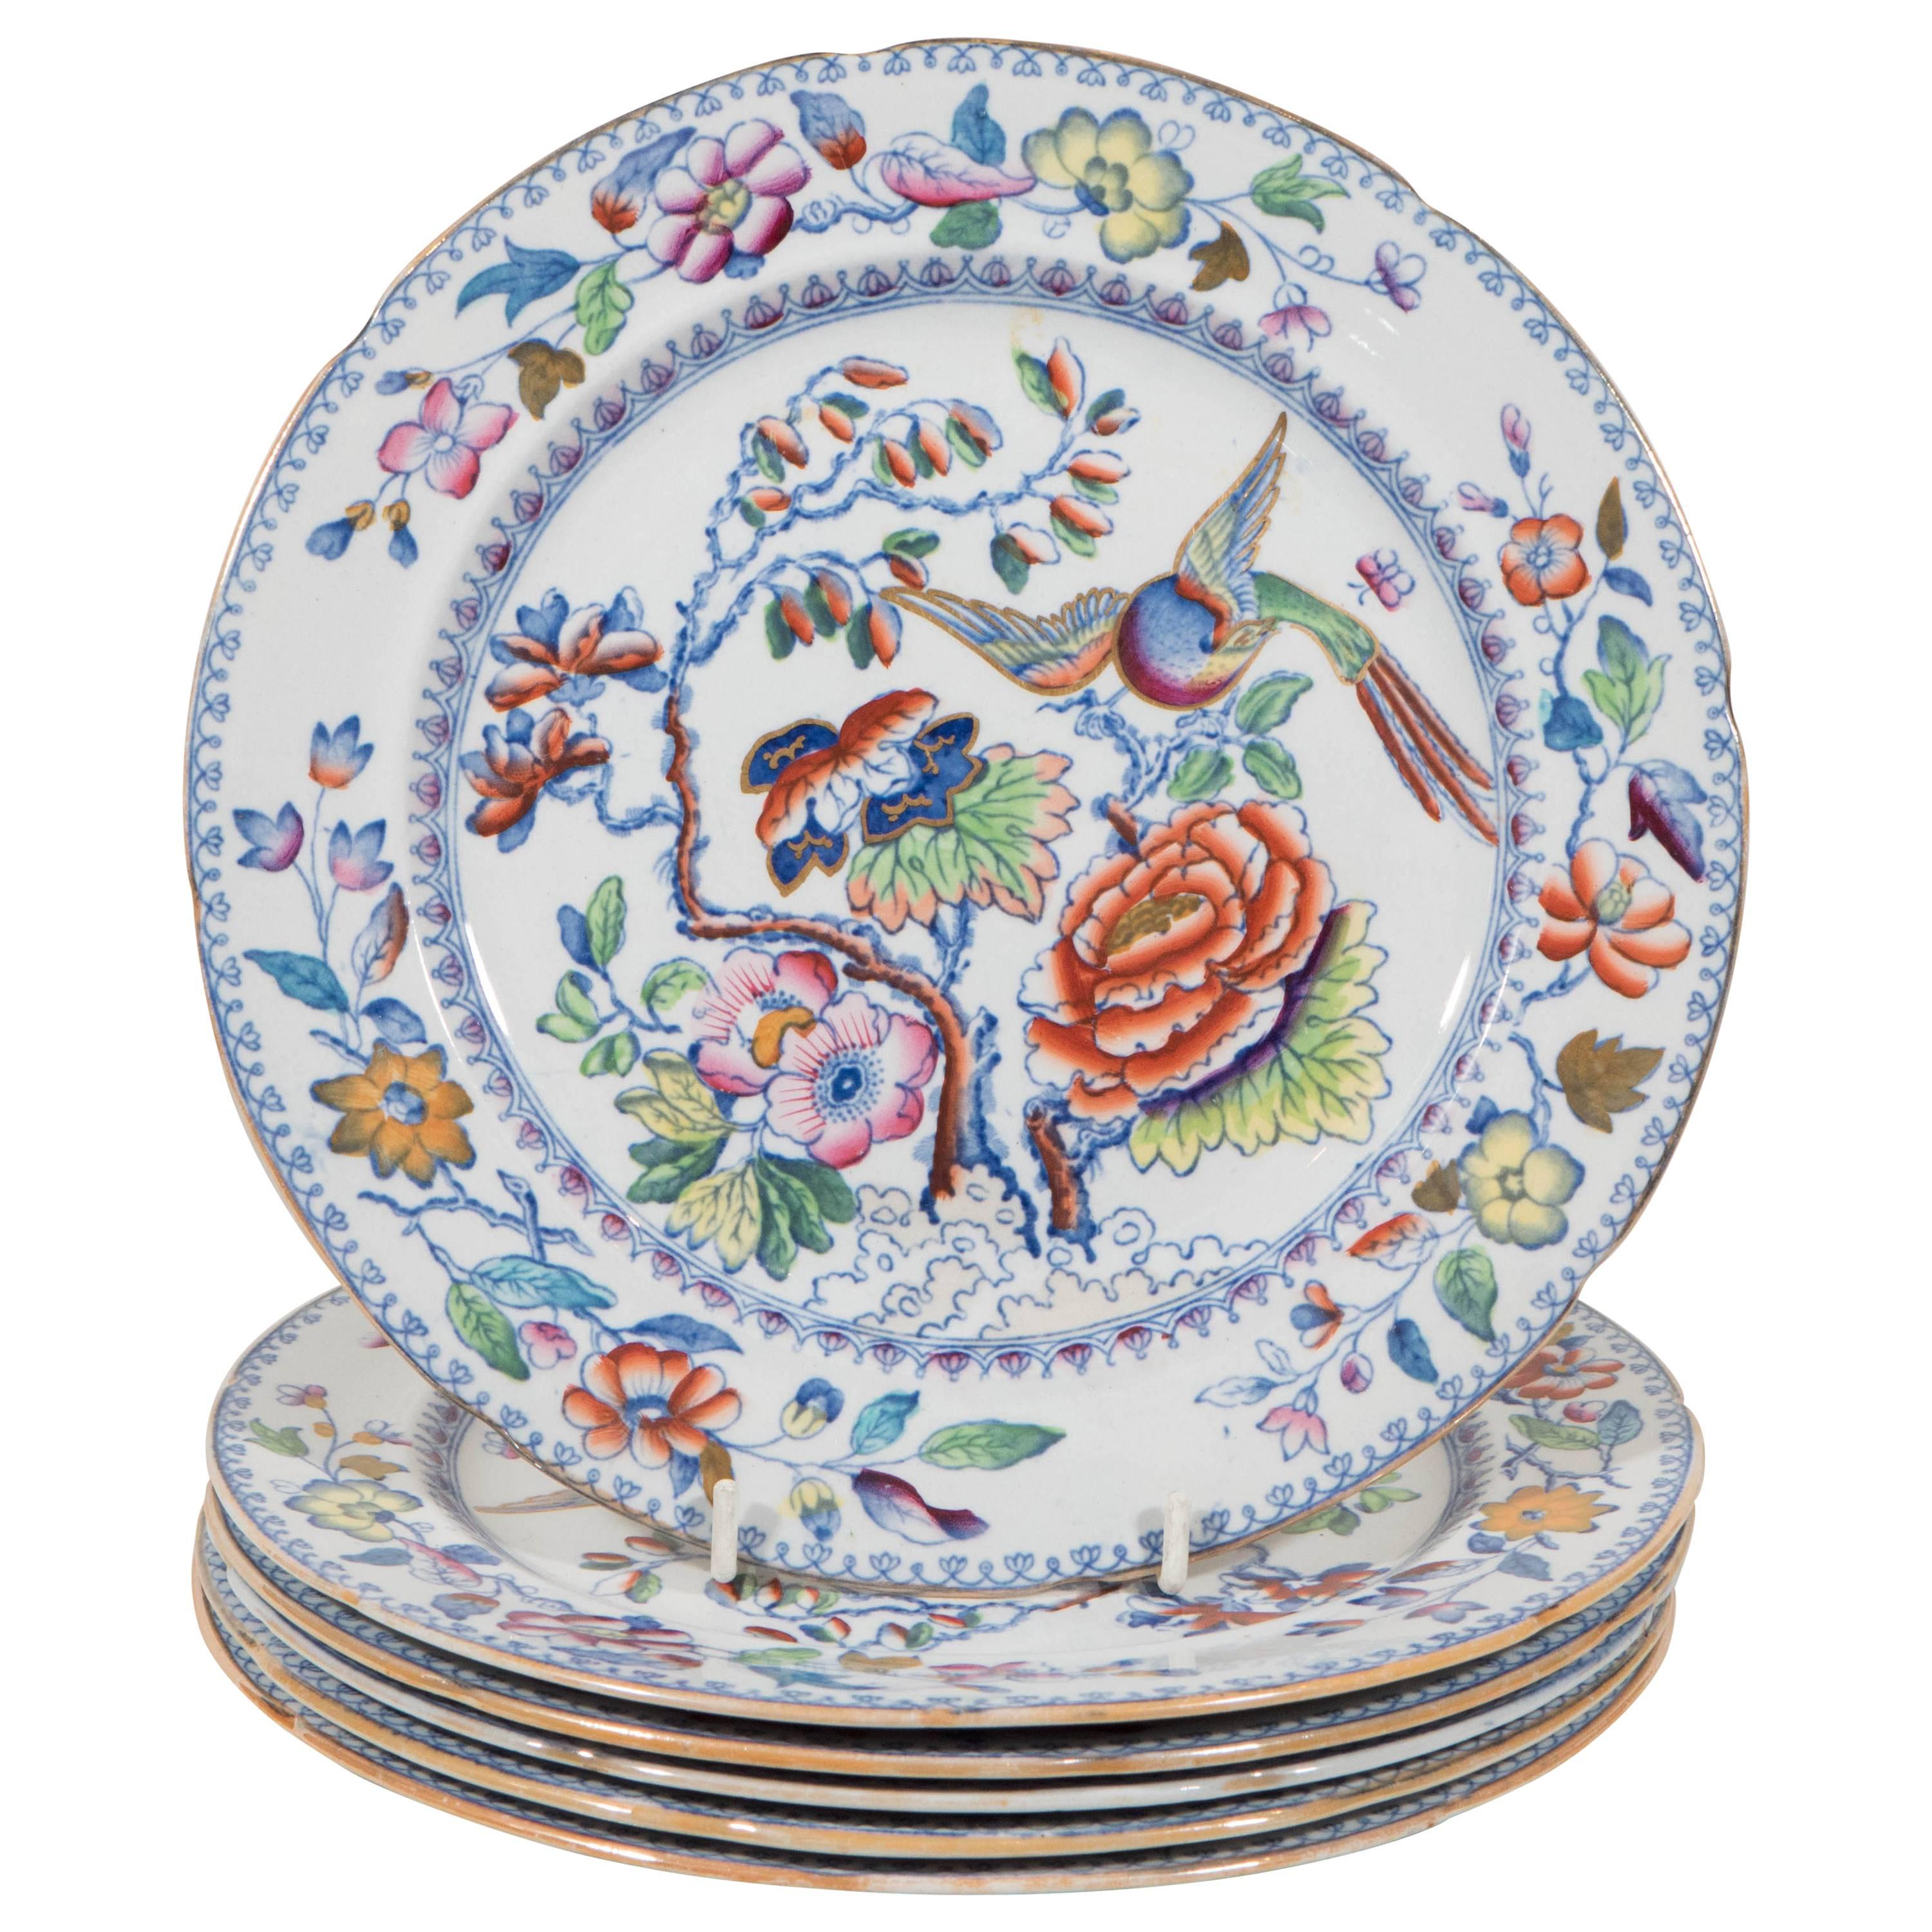 Set of 14 Mason's Ironstone Dinner Dishes in the "Flying Bird" Pattern